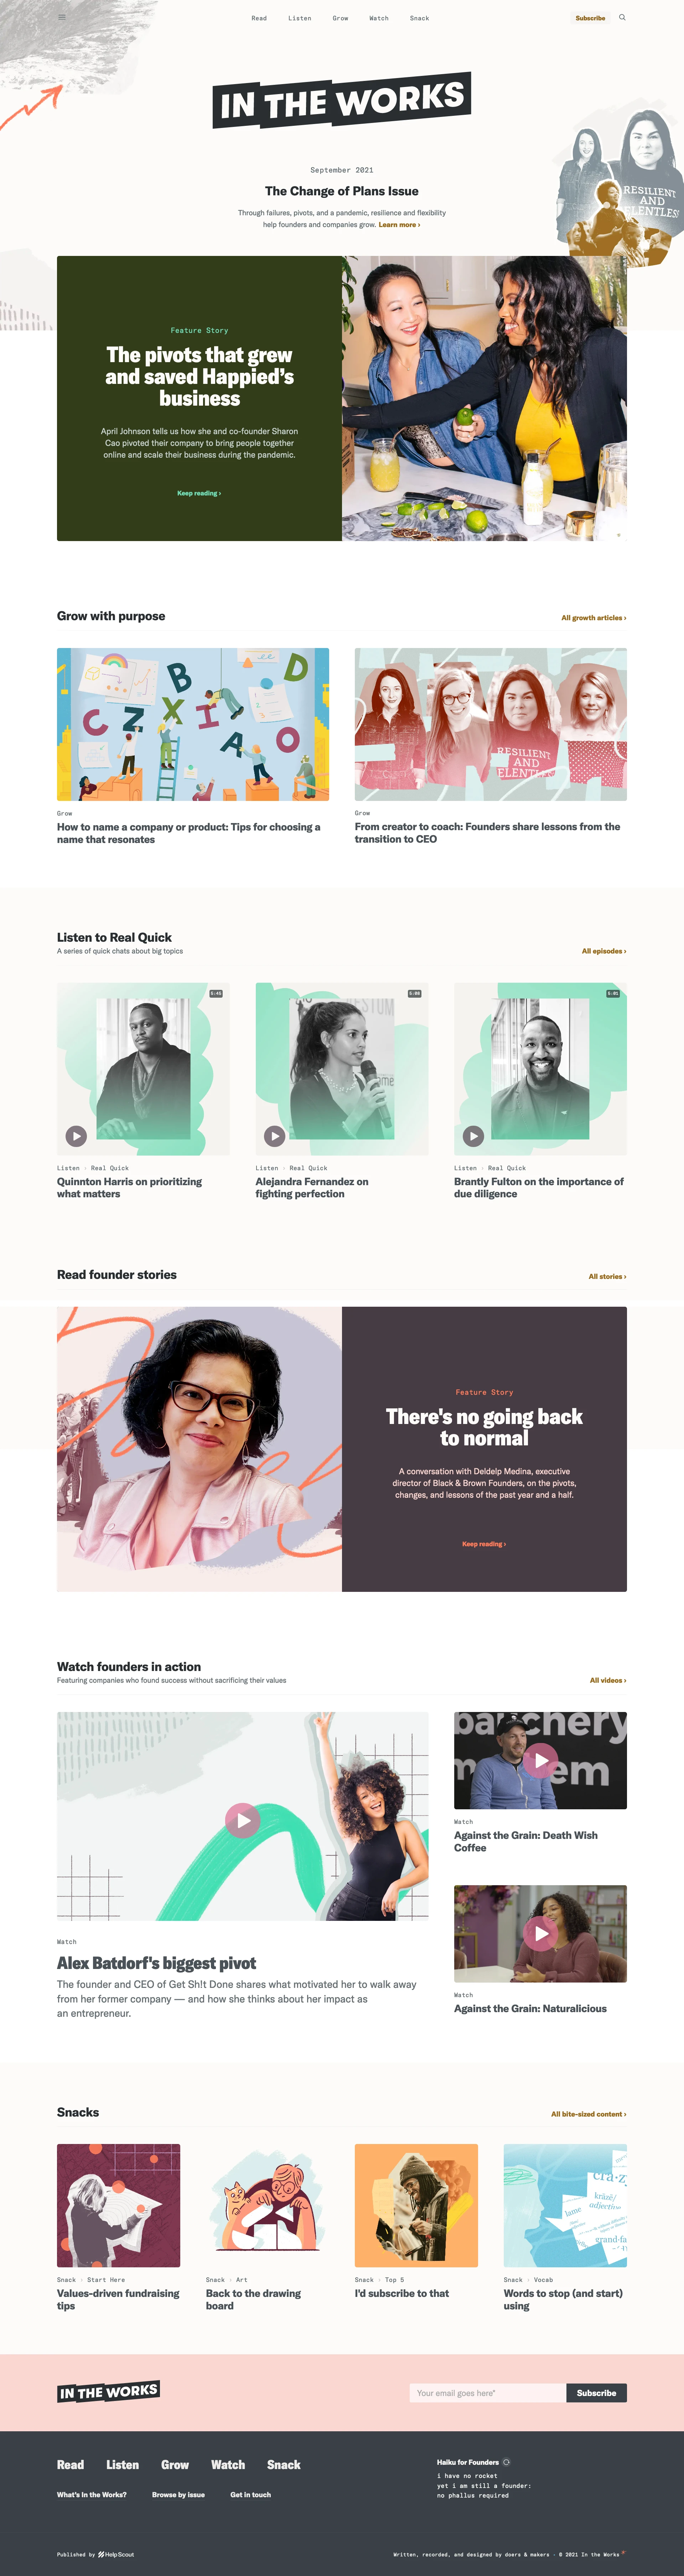 In the Works Landing Page Example: In the Works is a brand new publication for mission-driven small businesses and founders who want to stay true to their values at every turn.